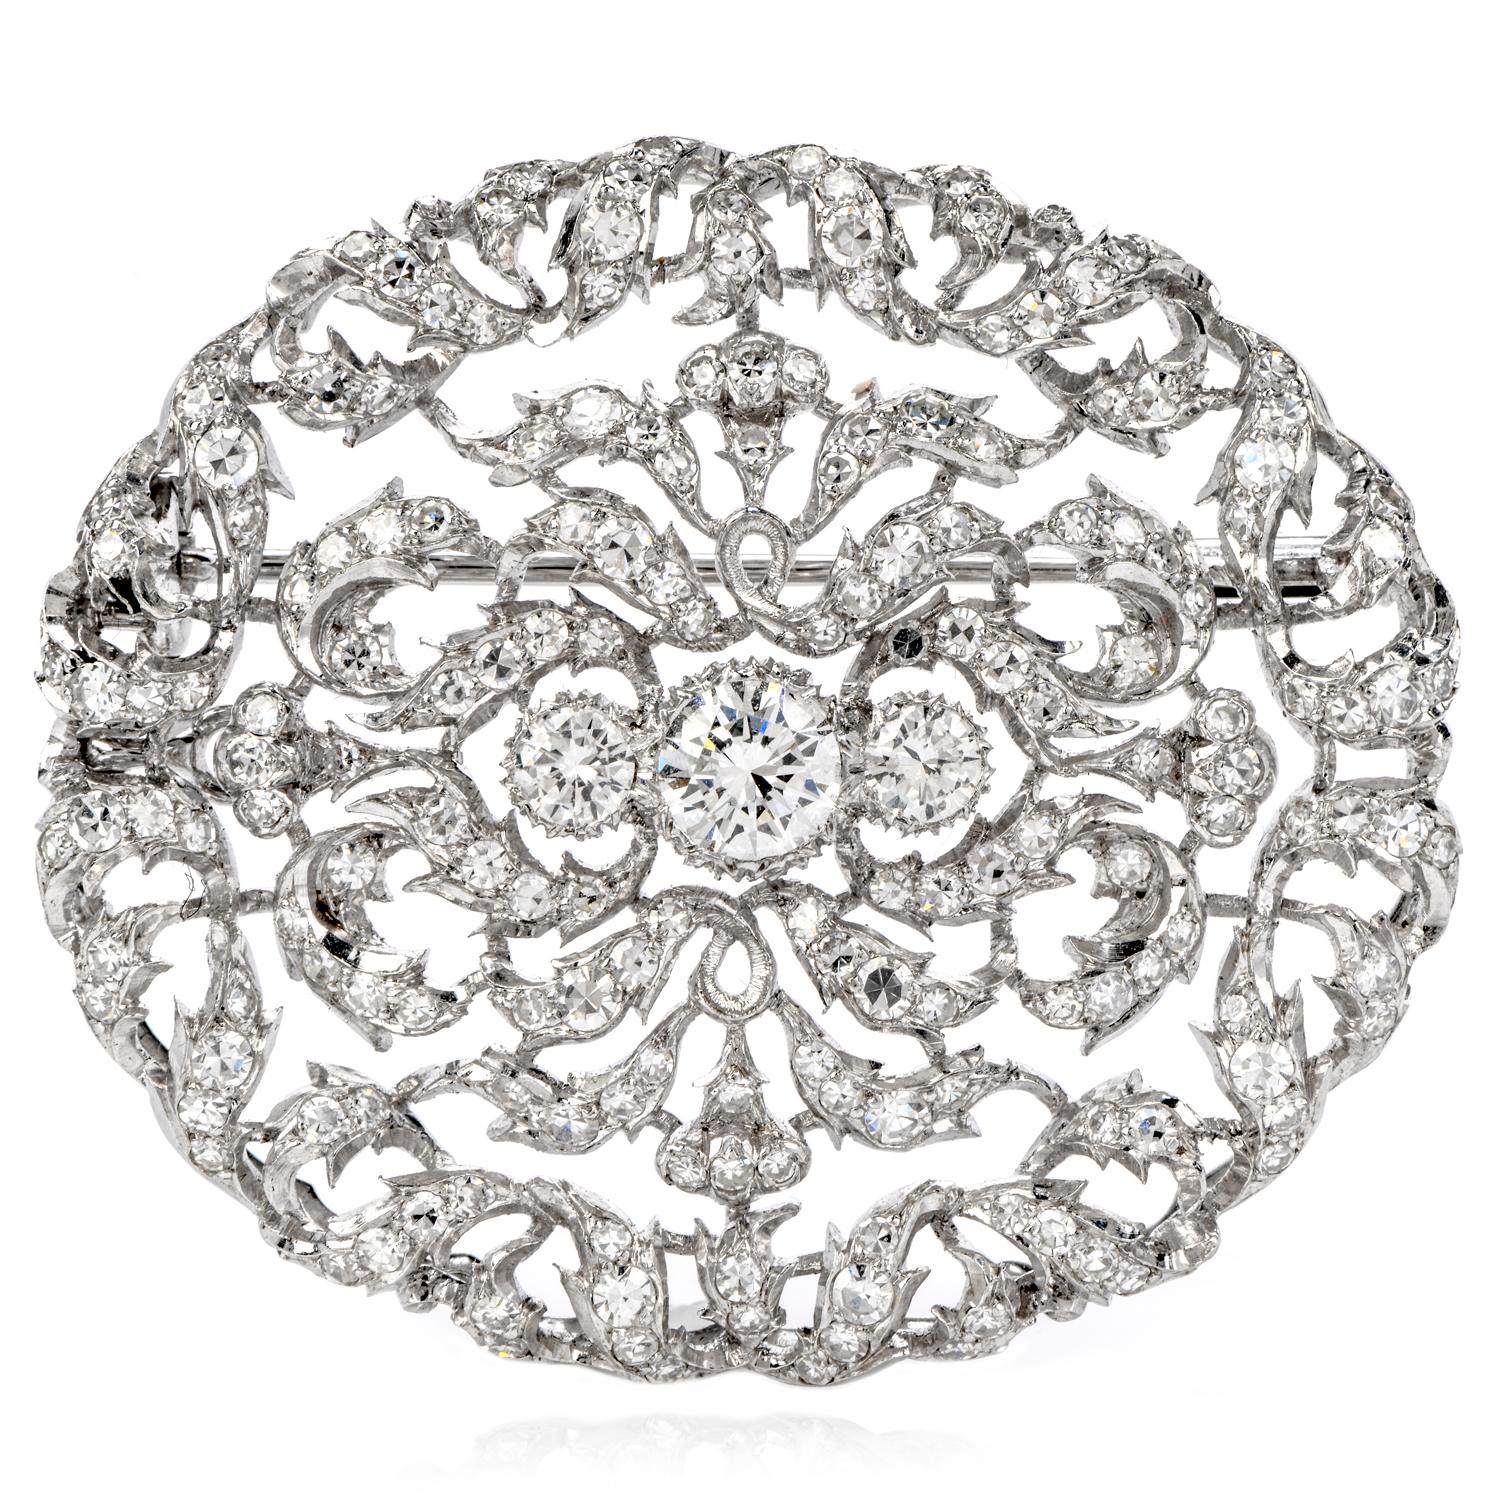 Fashion yourself with this intricate and prestigious Vintage Buccellati Diamond Platinum Filigree Brooch and Pendant! 
This brooch & pendant weighs approximately 22 grams, is set in quality platinum, and measures at 39 mm x 44 mm. 

Three genuine